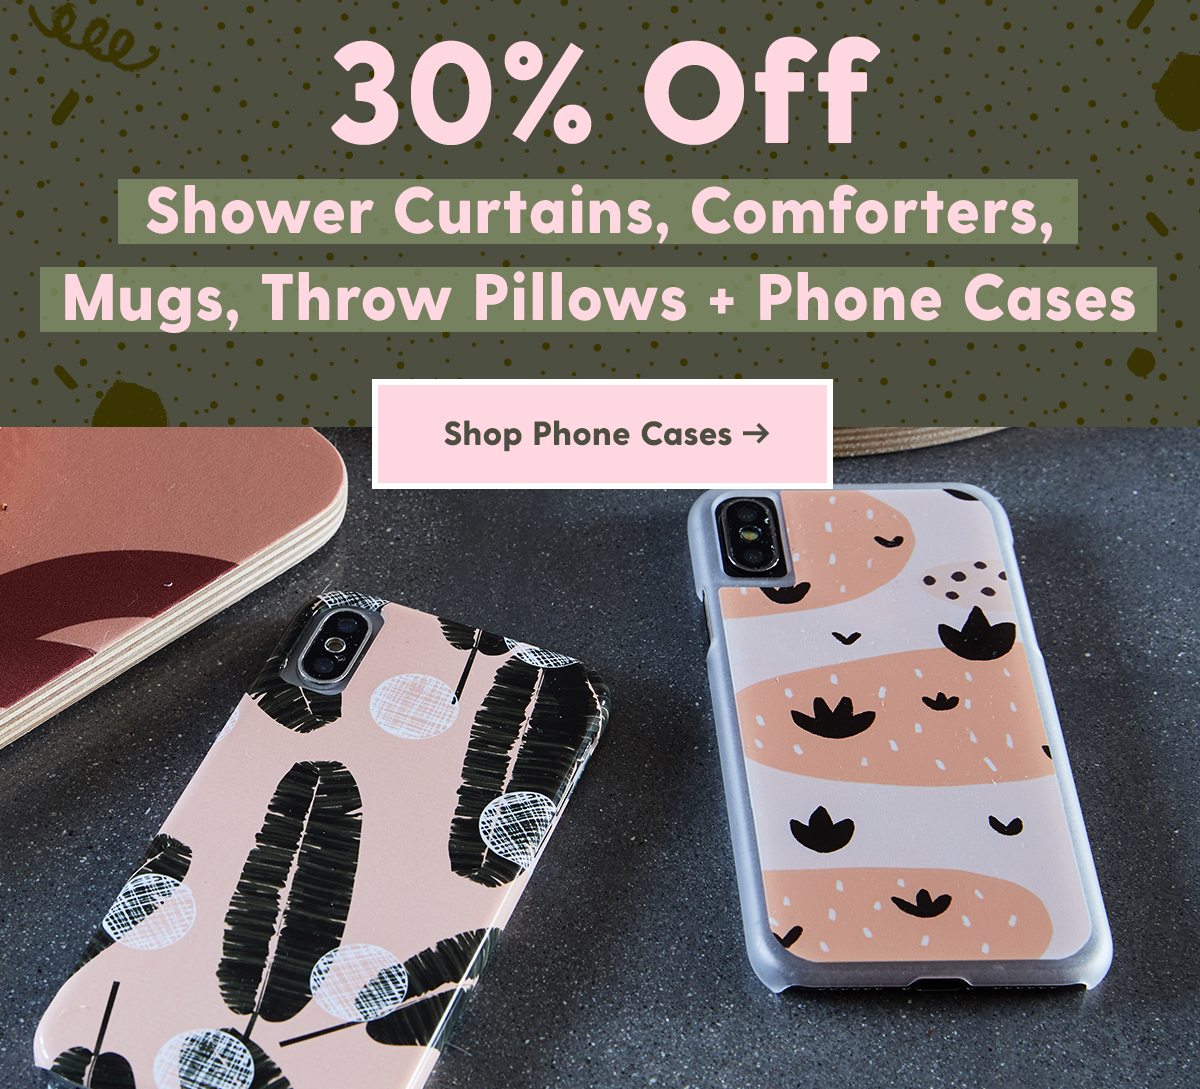 30% Off Shower Curtains, Comforters, Coffee Mugs, Throw Pillows + Phone CasesShop Phone Cases >